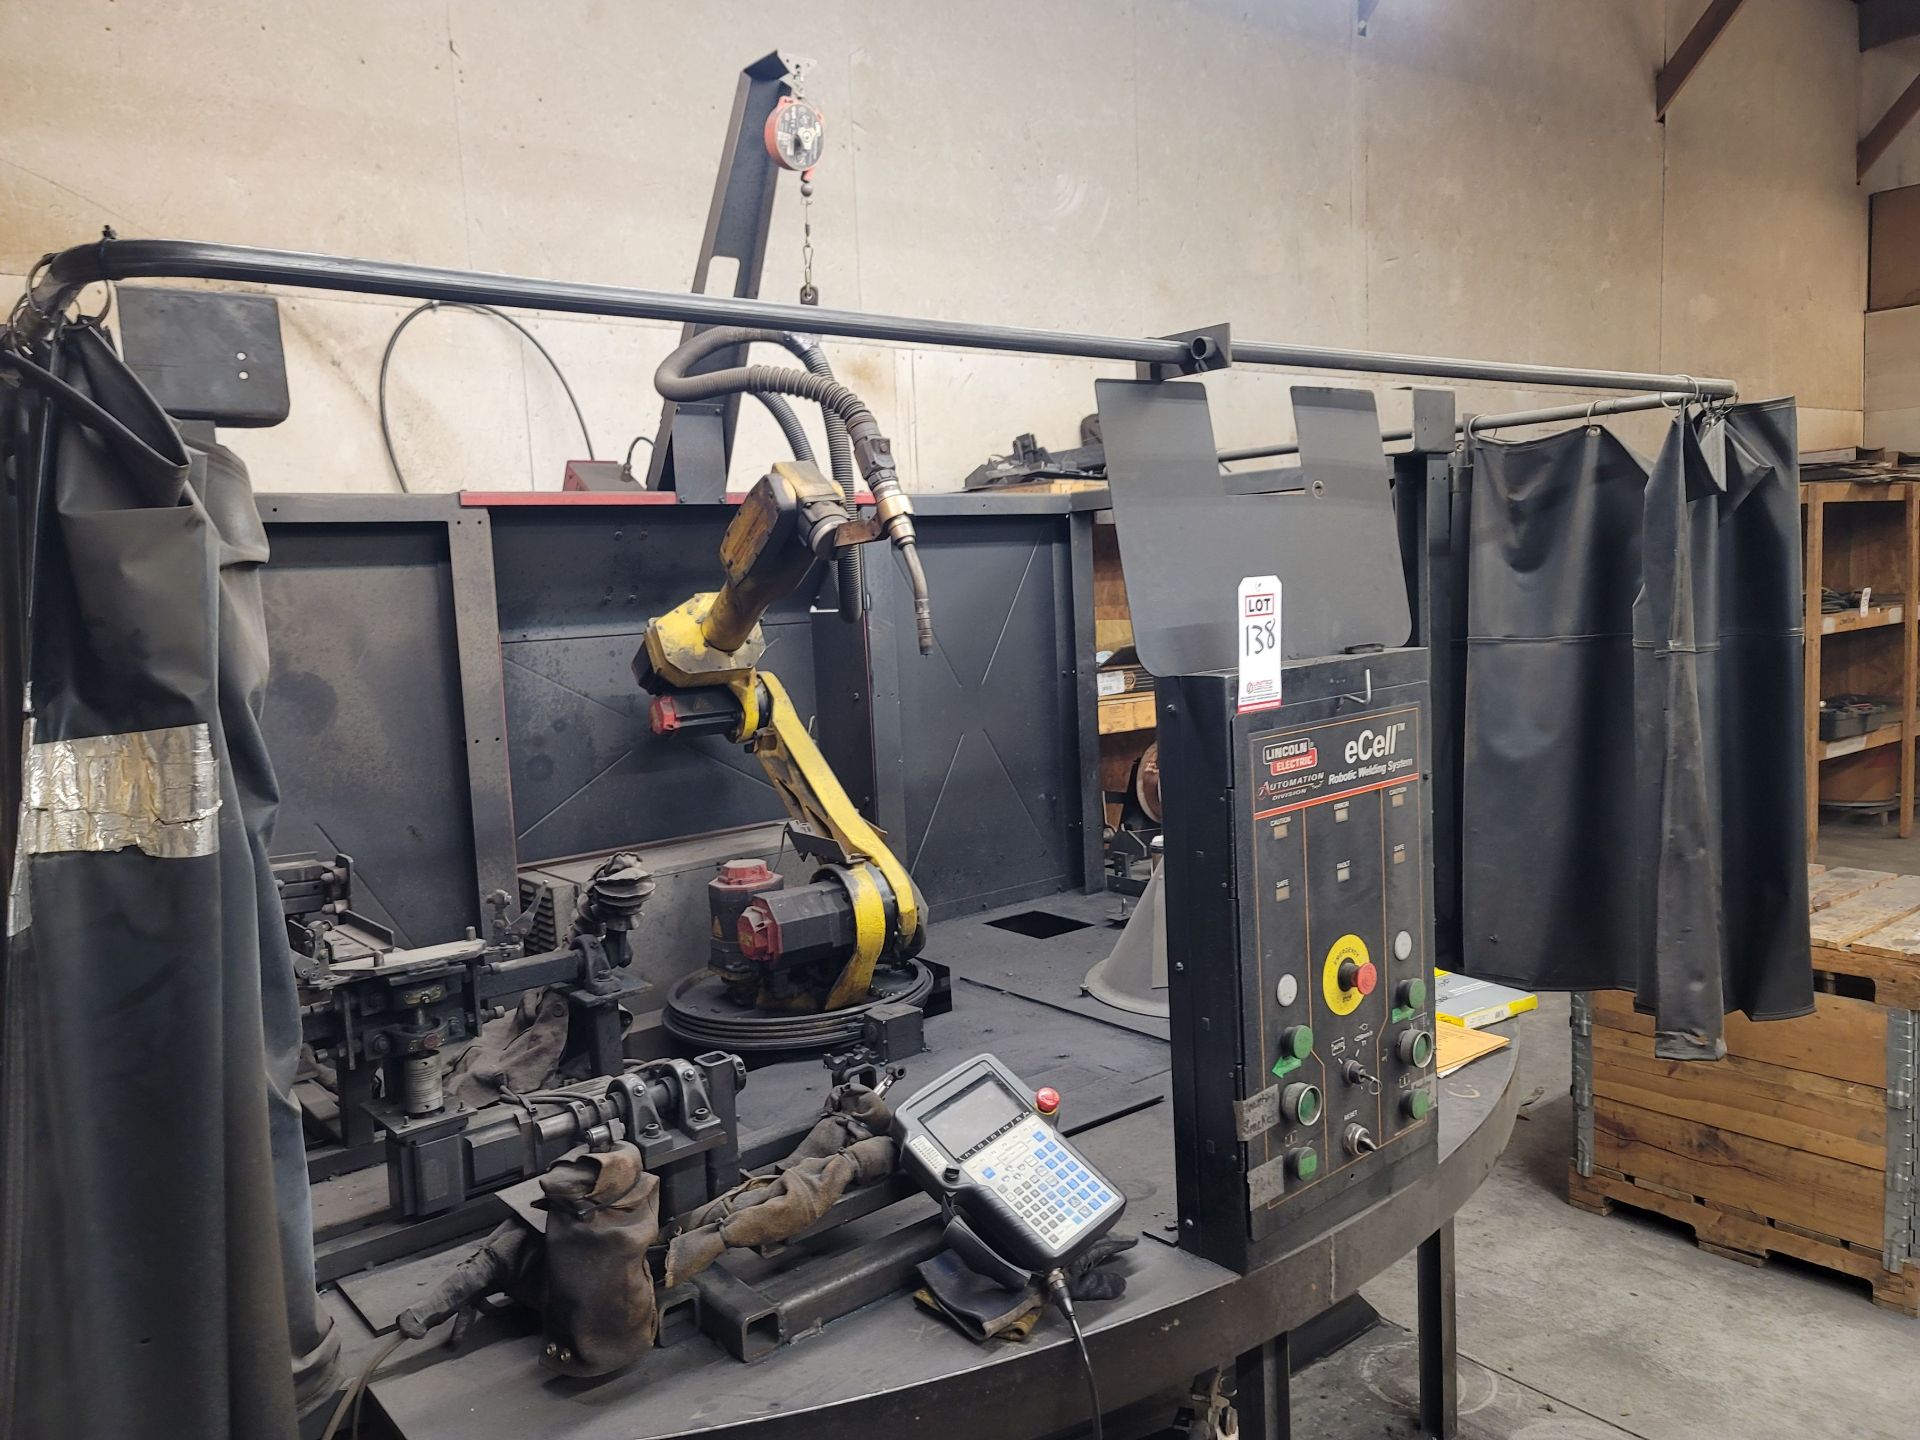 2004 LINCOLN ELECTRIC E-CELL ROBOTIC WELDING SYSTEM, FANUC 6-AXIS ROBOT 100IBE W/ RJ3IB - Image 13 of 13